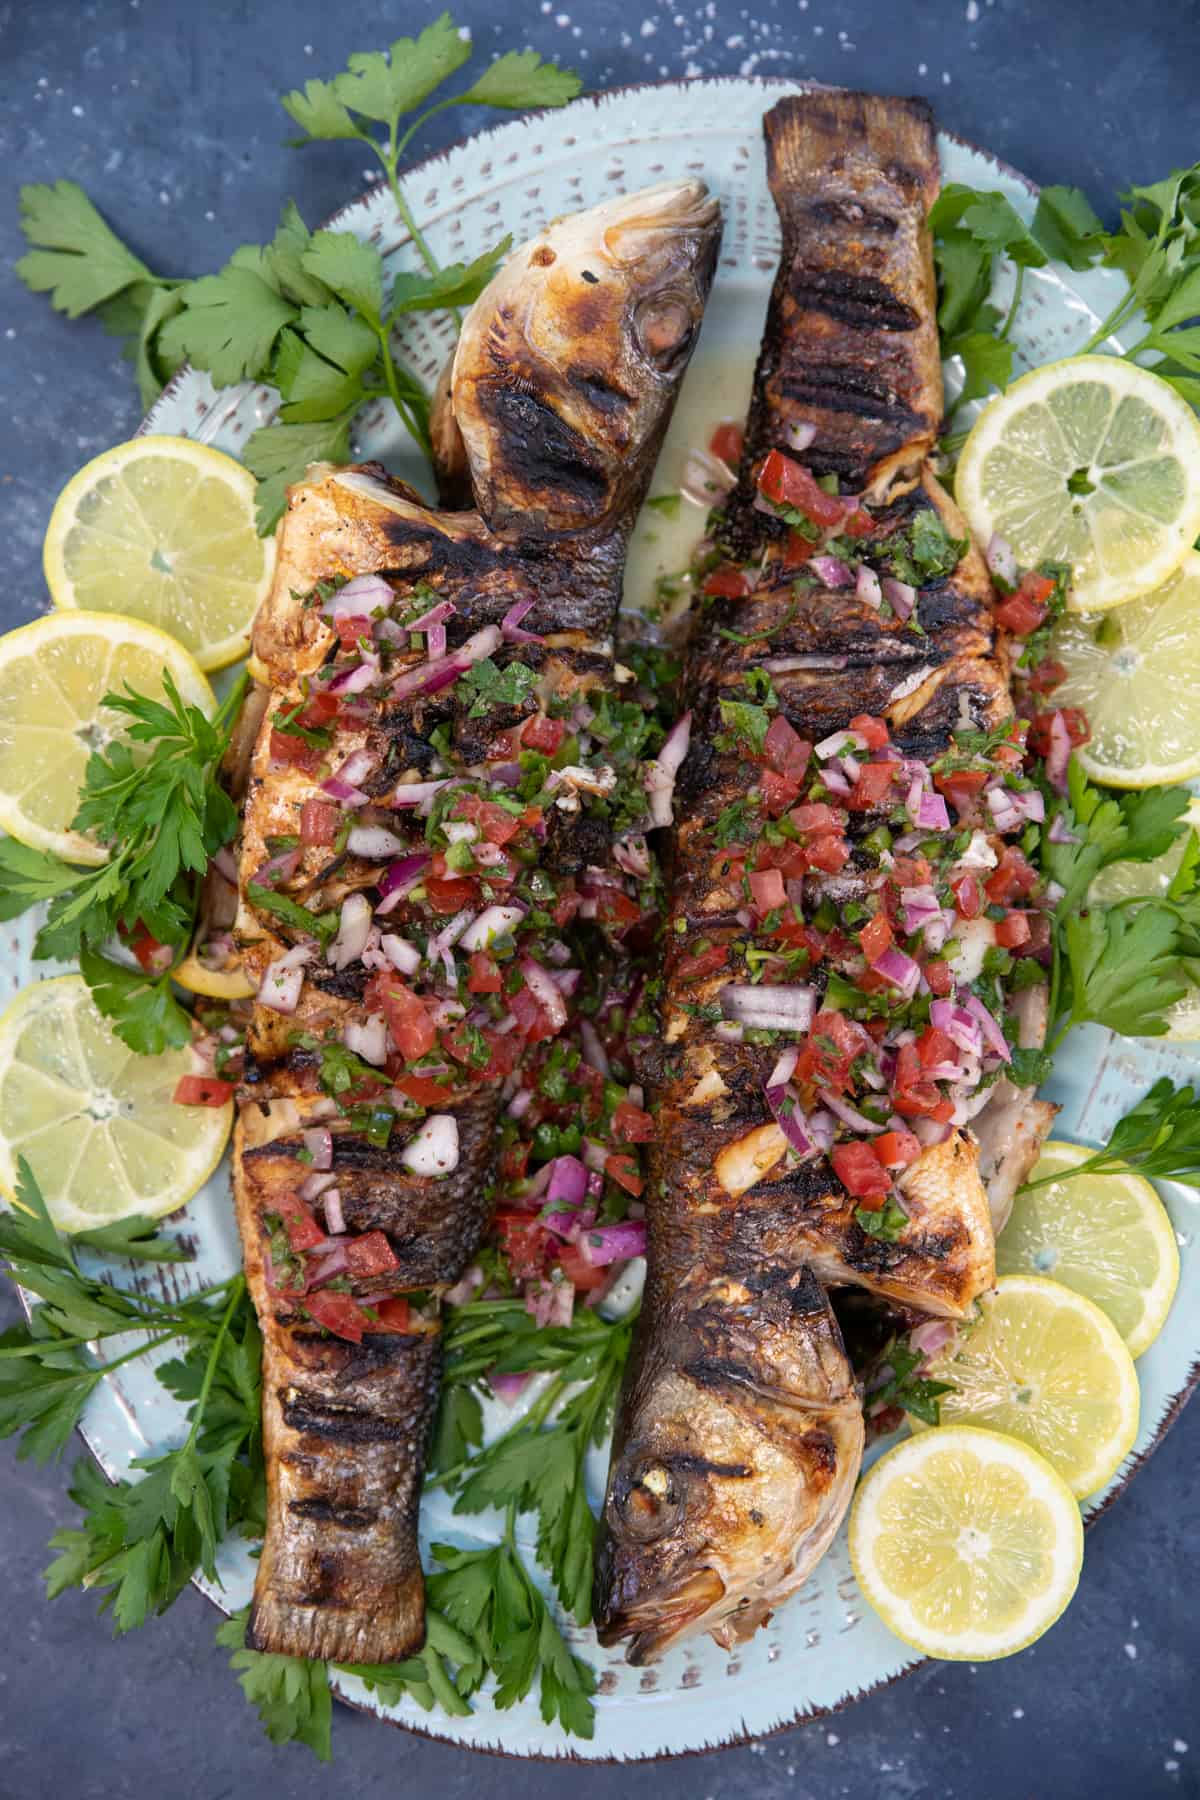 This grilled branzino recipe with a Mediterranean twist is a must-try! The fish is marinated with a herb and lemon mixture then grilled to perfection and topped with a bright tomato herb relish. There is a flavor feast in every bite.
